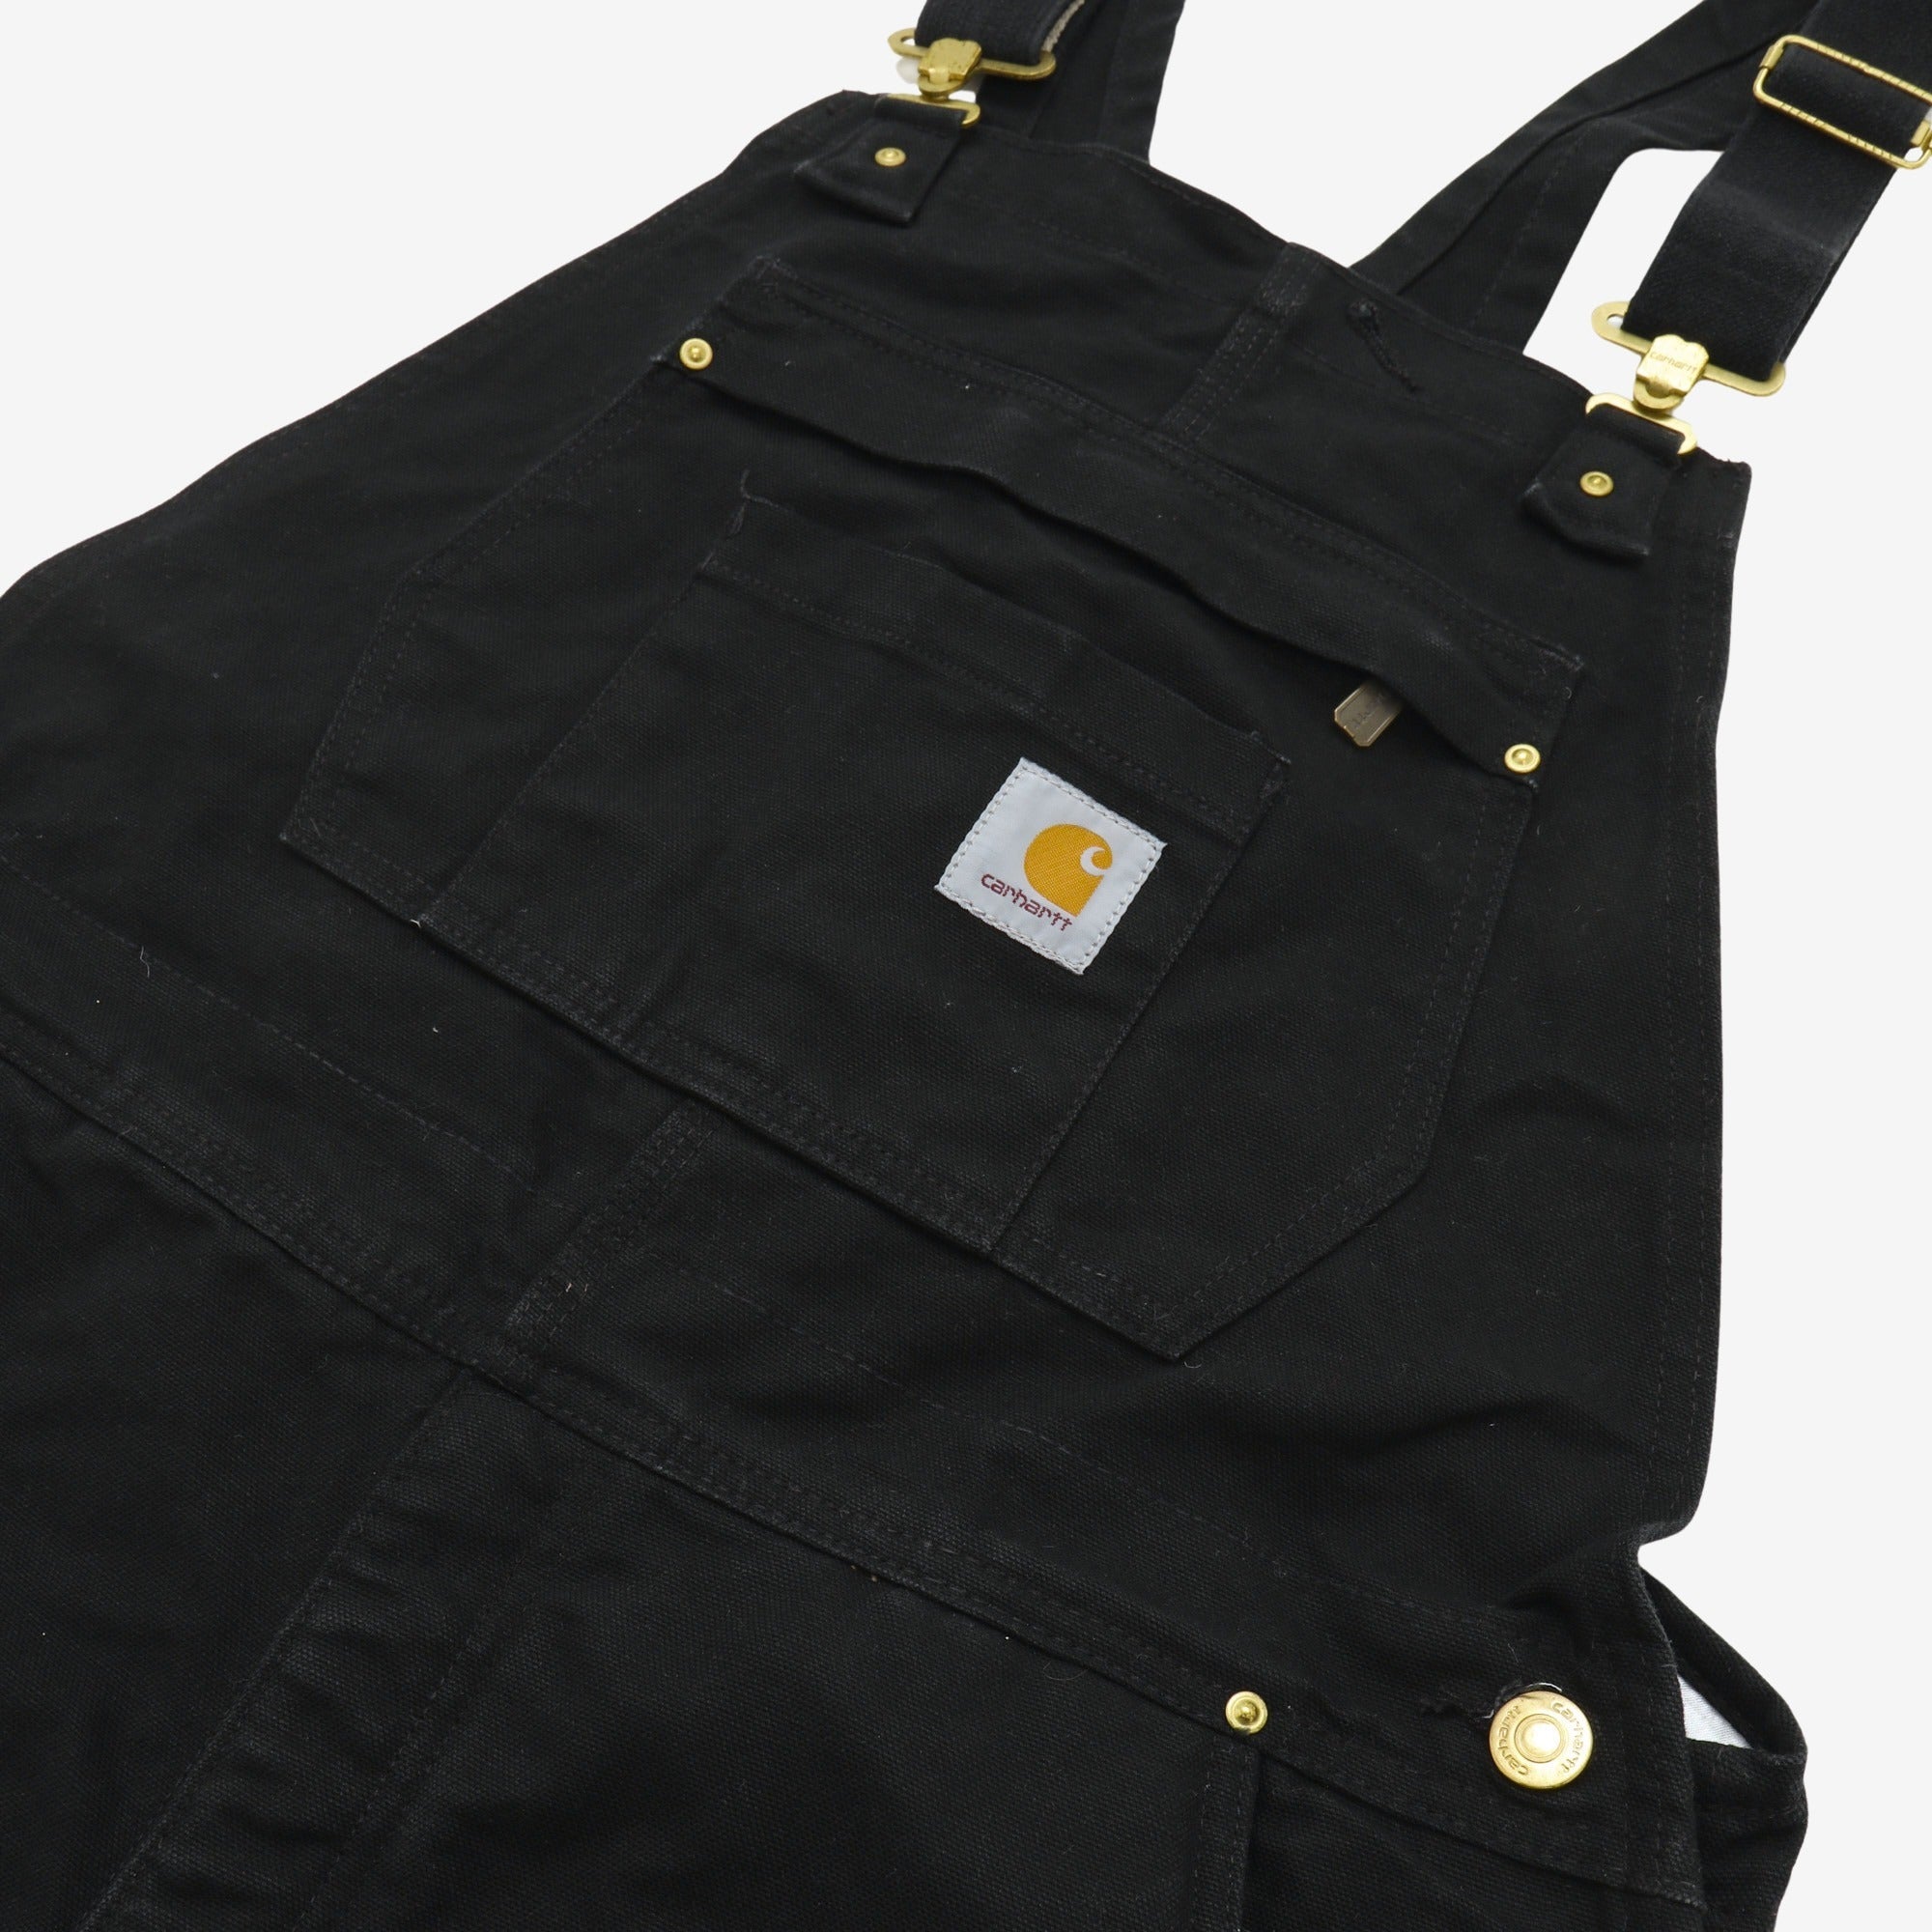 Loose Fit Insulated Bib Overalls